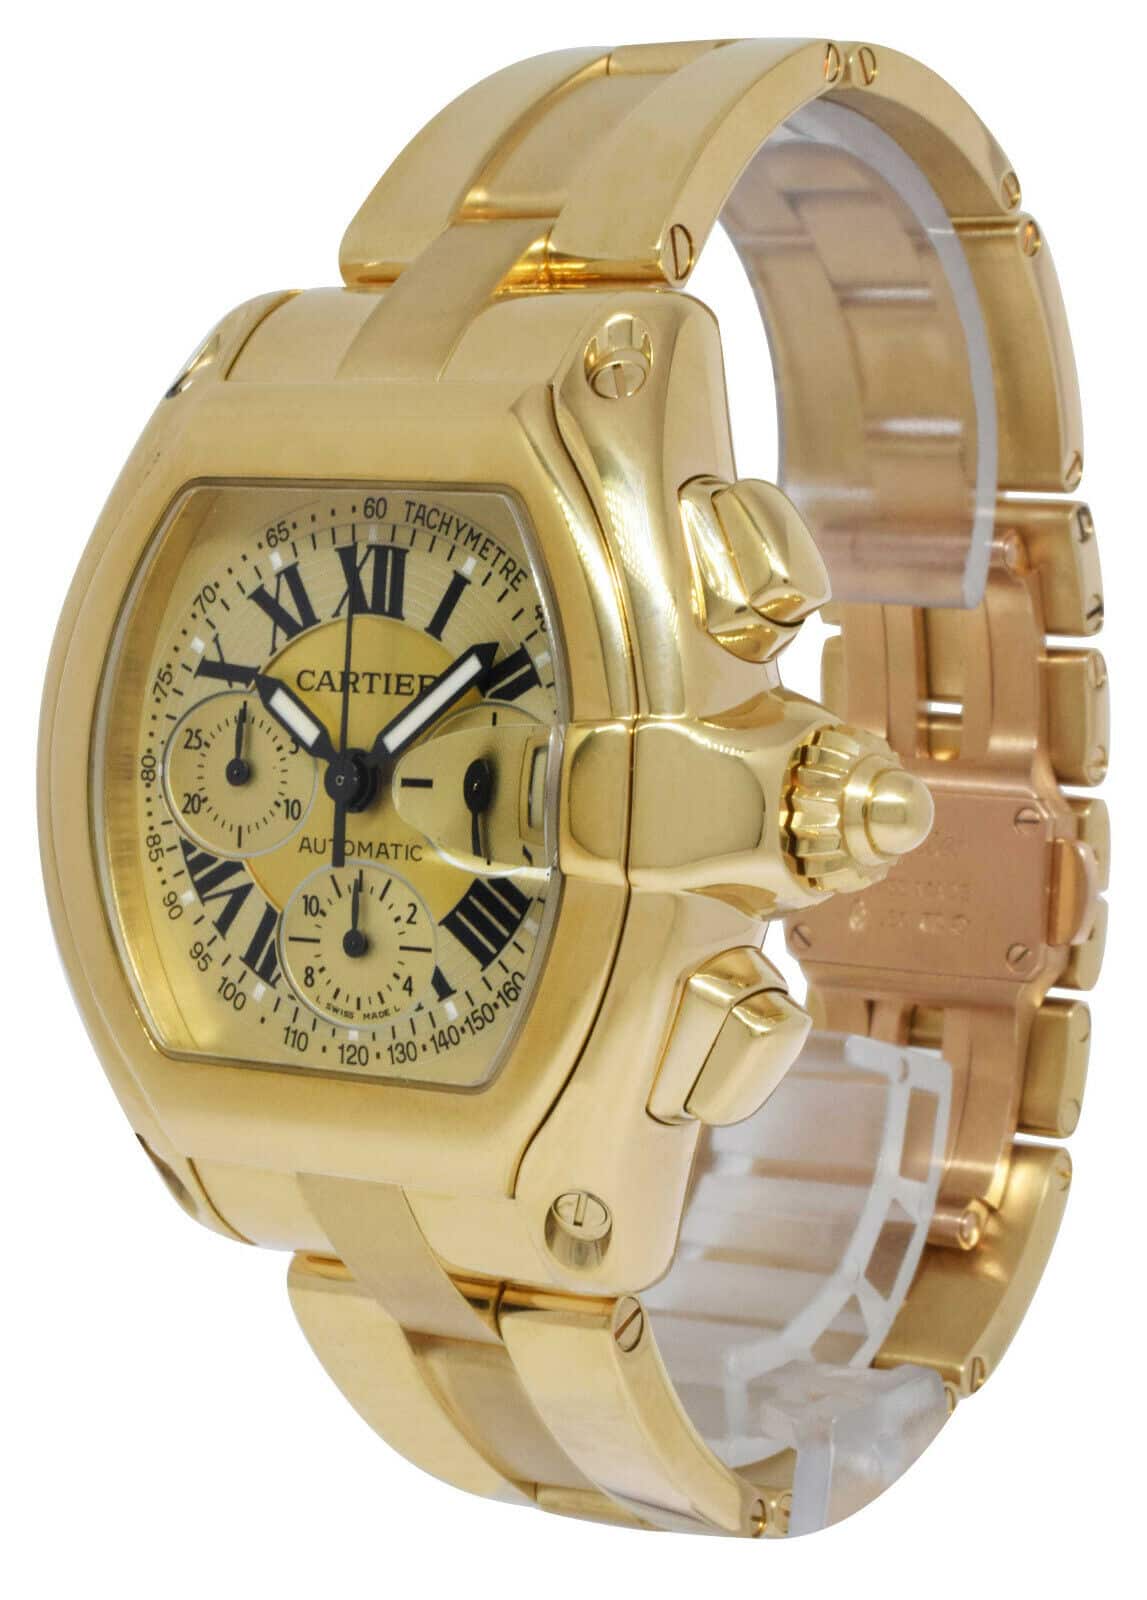 Cartier Roadster XL Chronograph 18k Yellow Gold Champagne Dial Mens Watch 2619